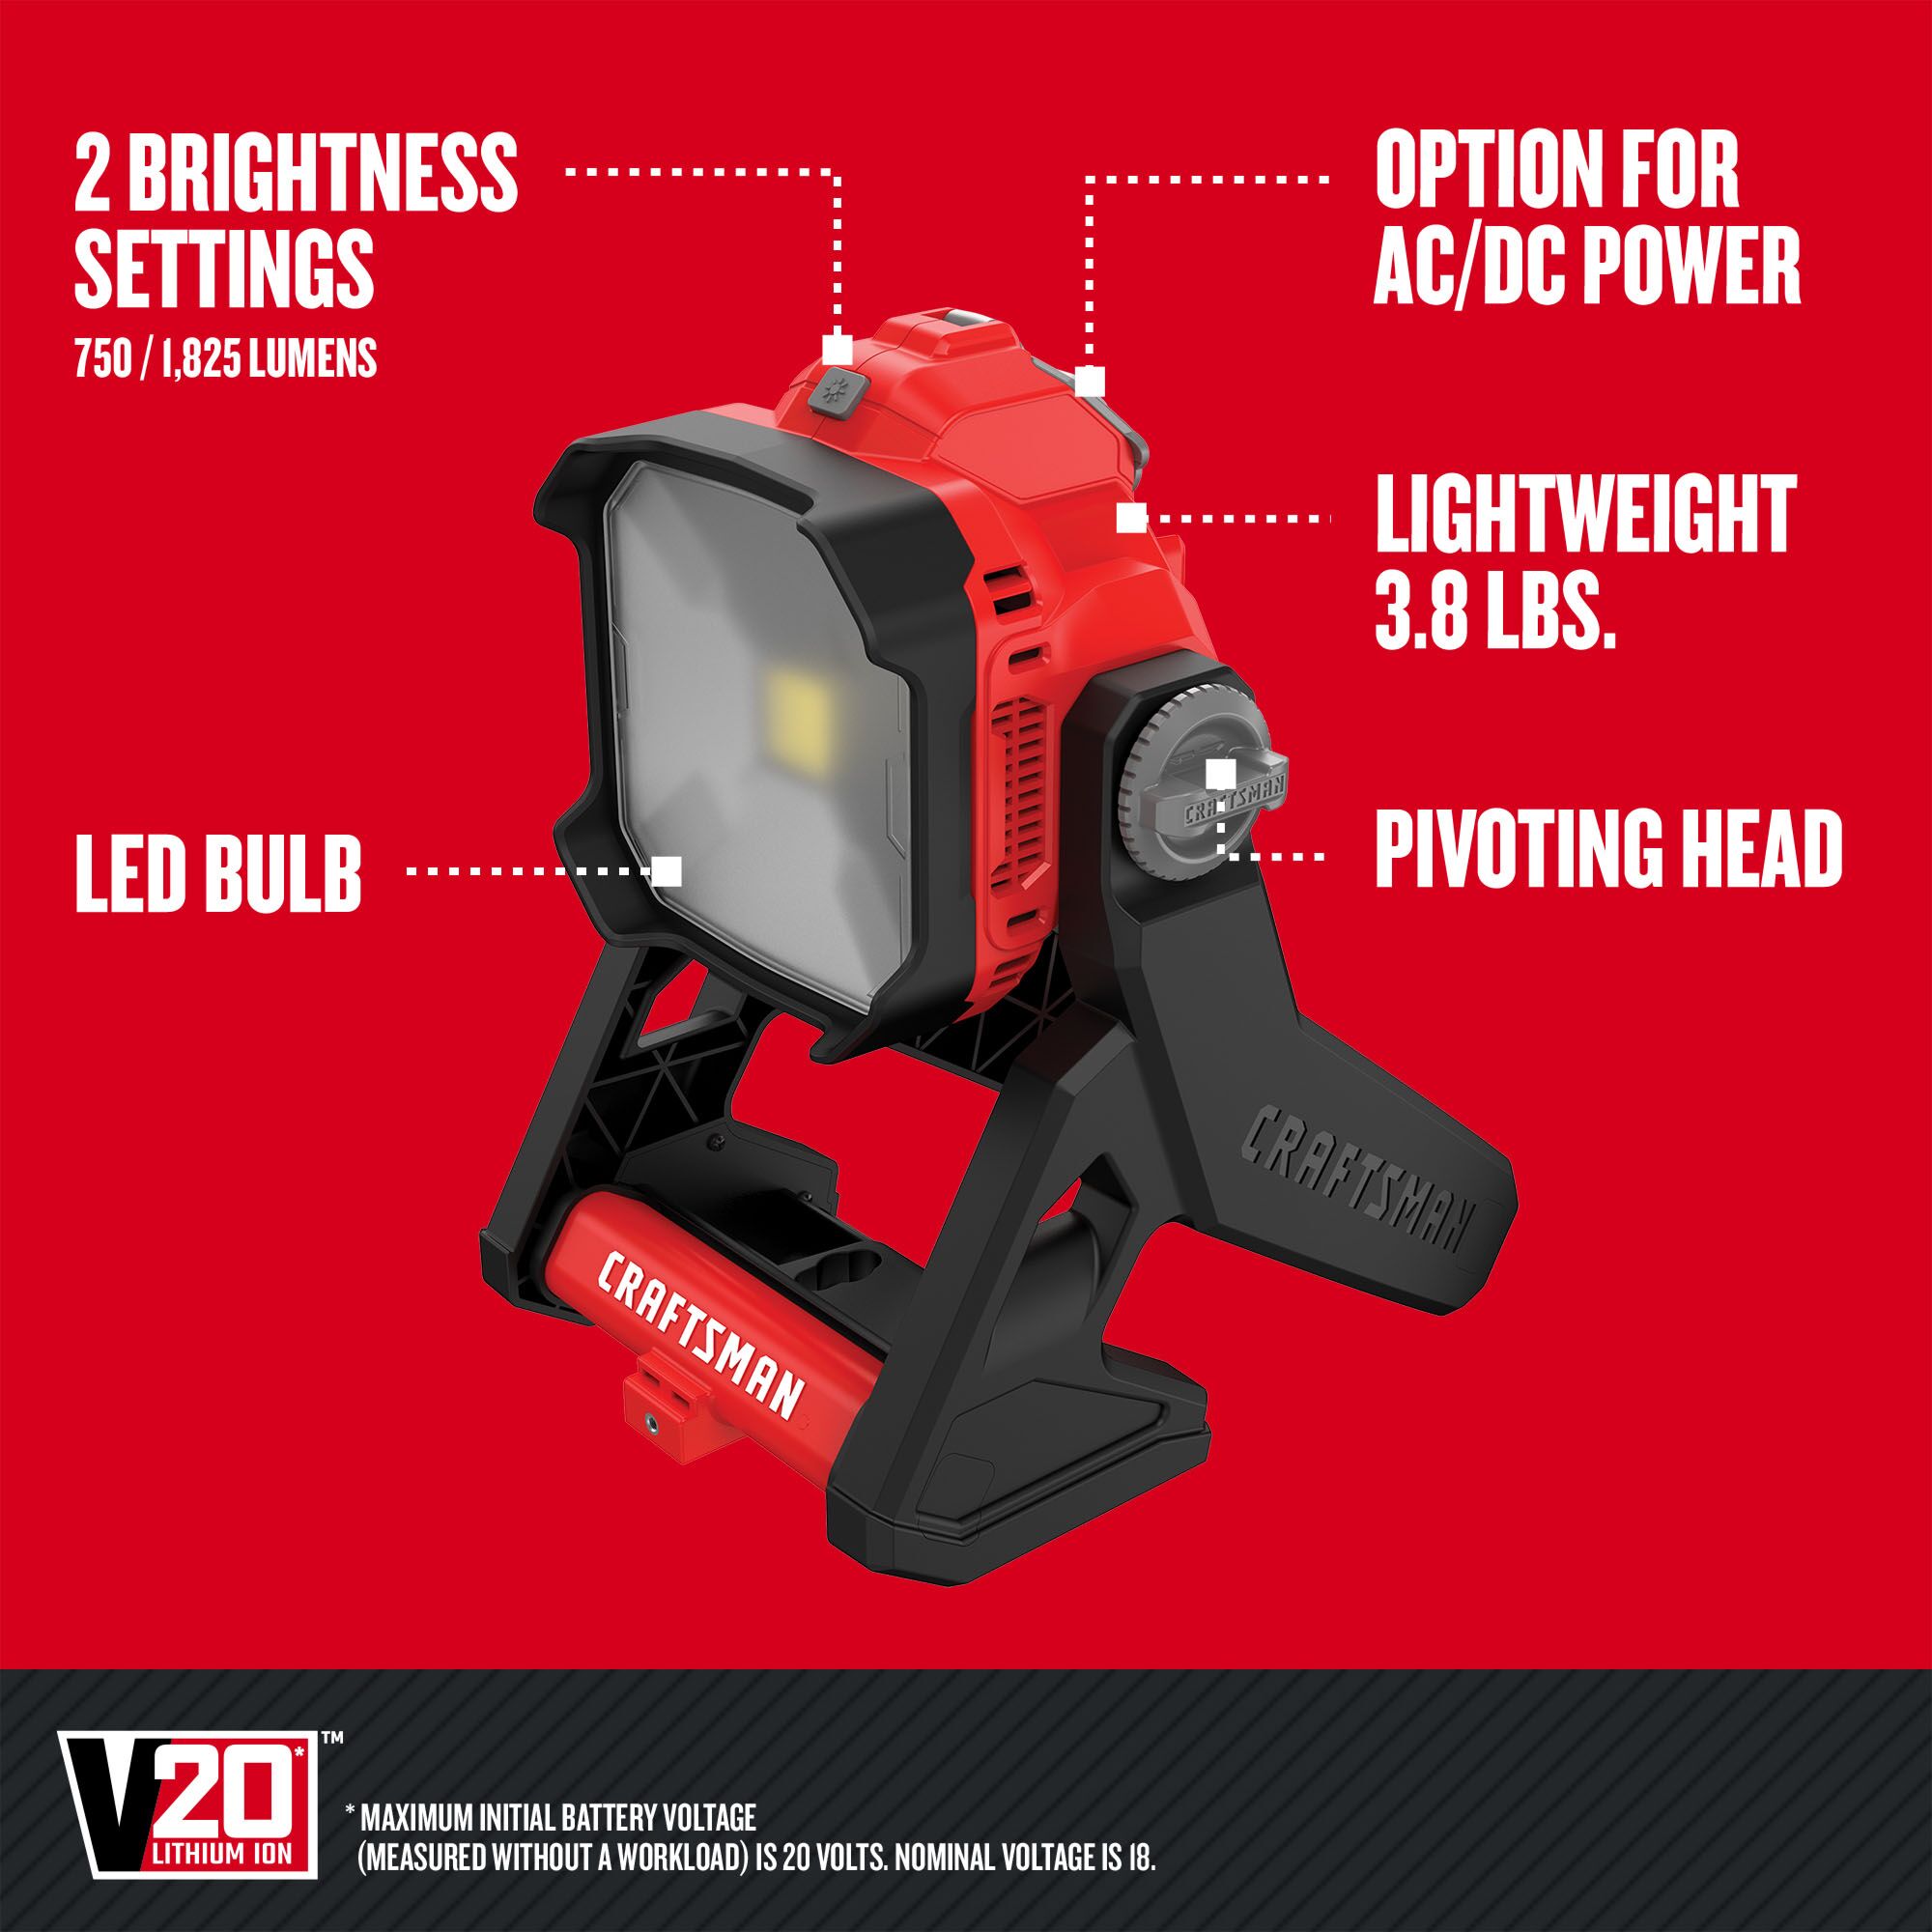 Graphic of CRAFTSMAN Lighting highlighting product features